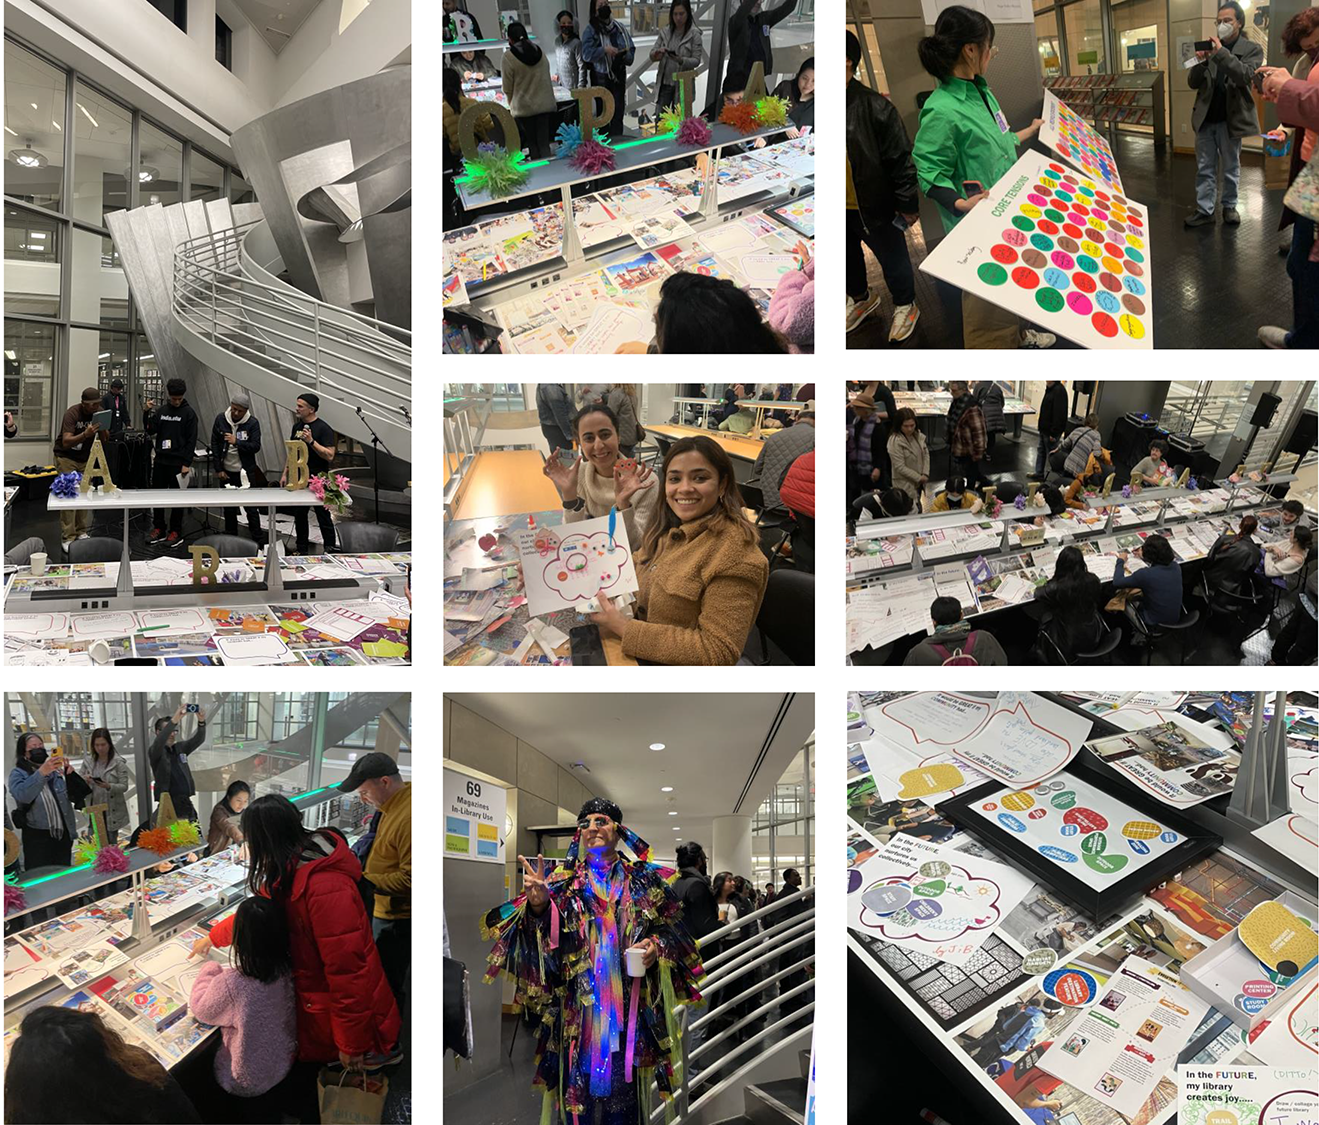 Members from the community, artists, and performers engaging in the activities during SFPL’s Night of Ideas